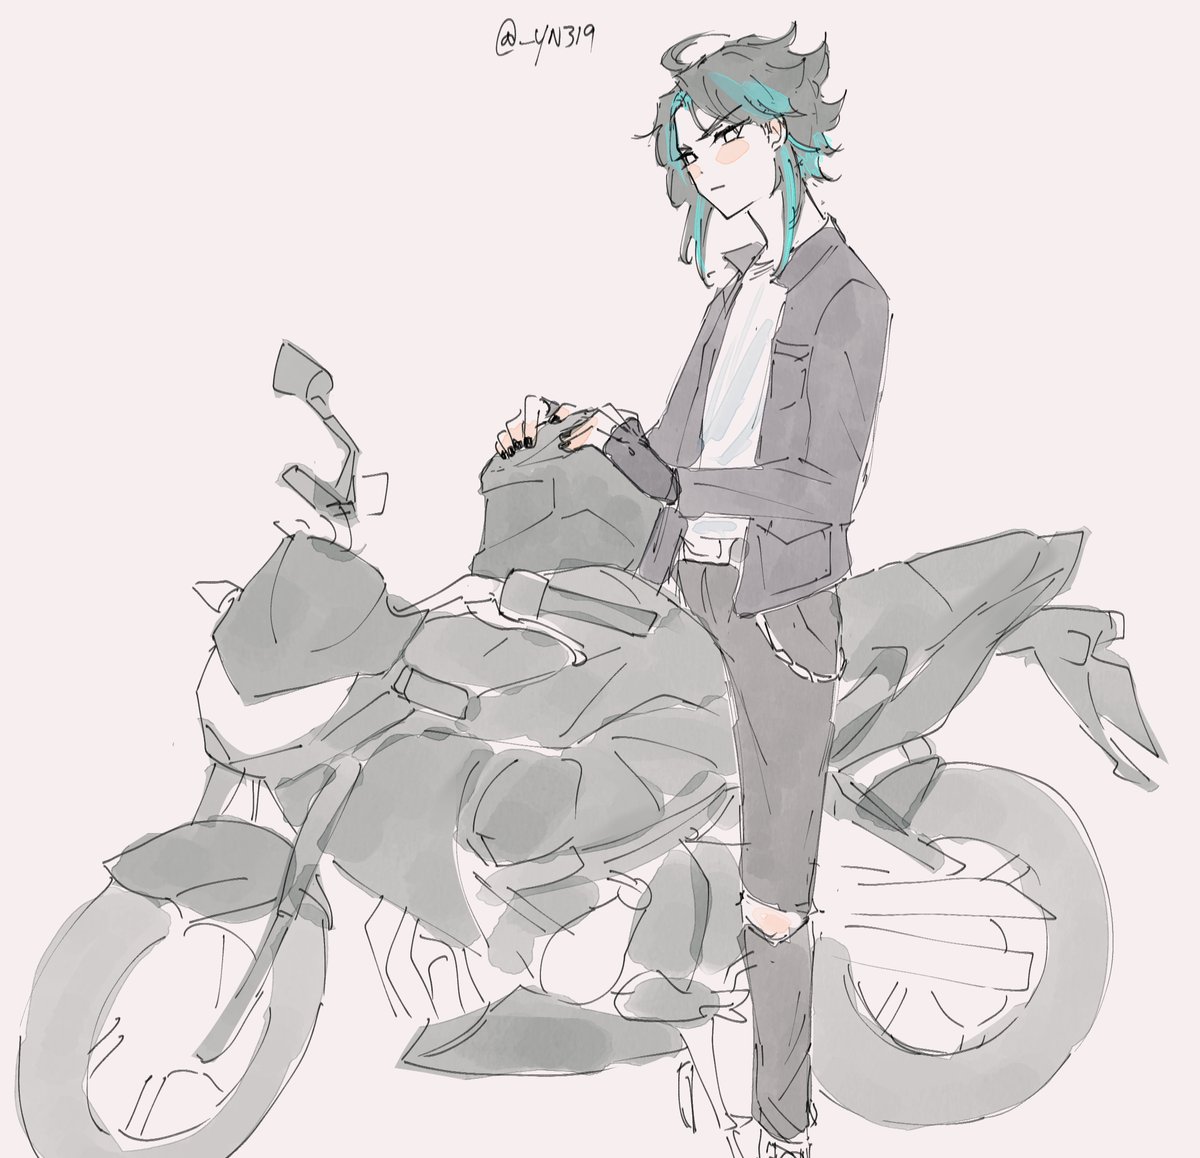 xiao with a motorcycle because i said so

#GenshinImpact  #原神 #xiao #aether #XiaoAether 